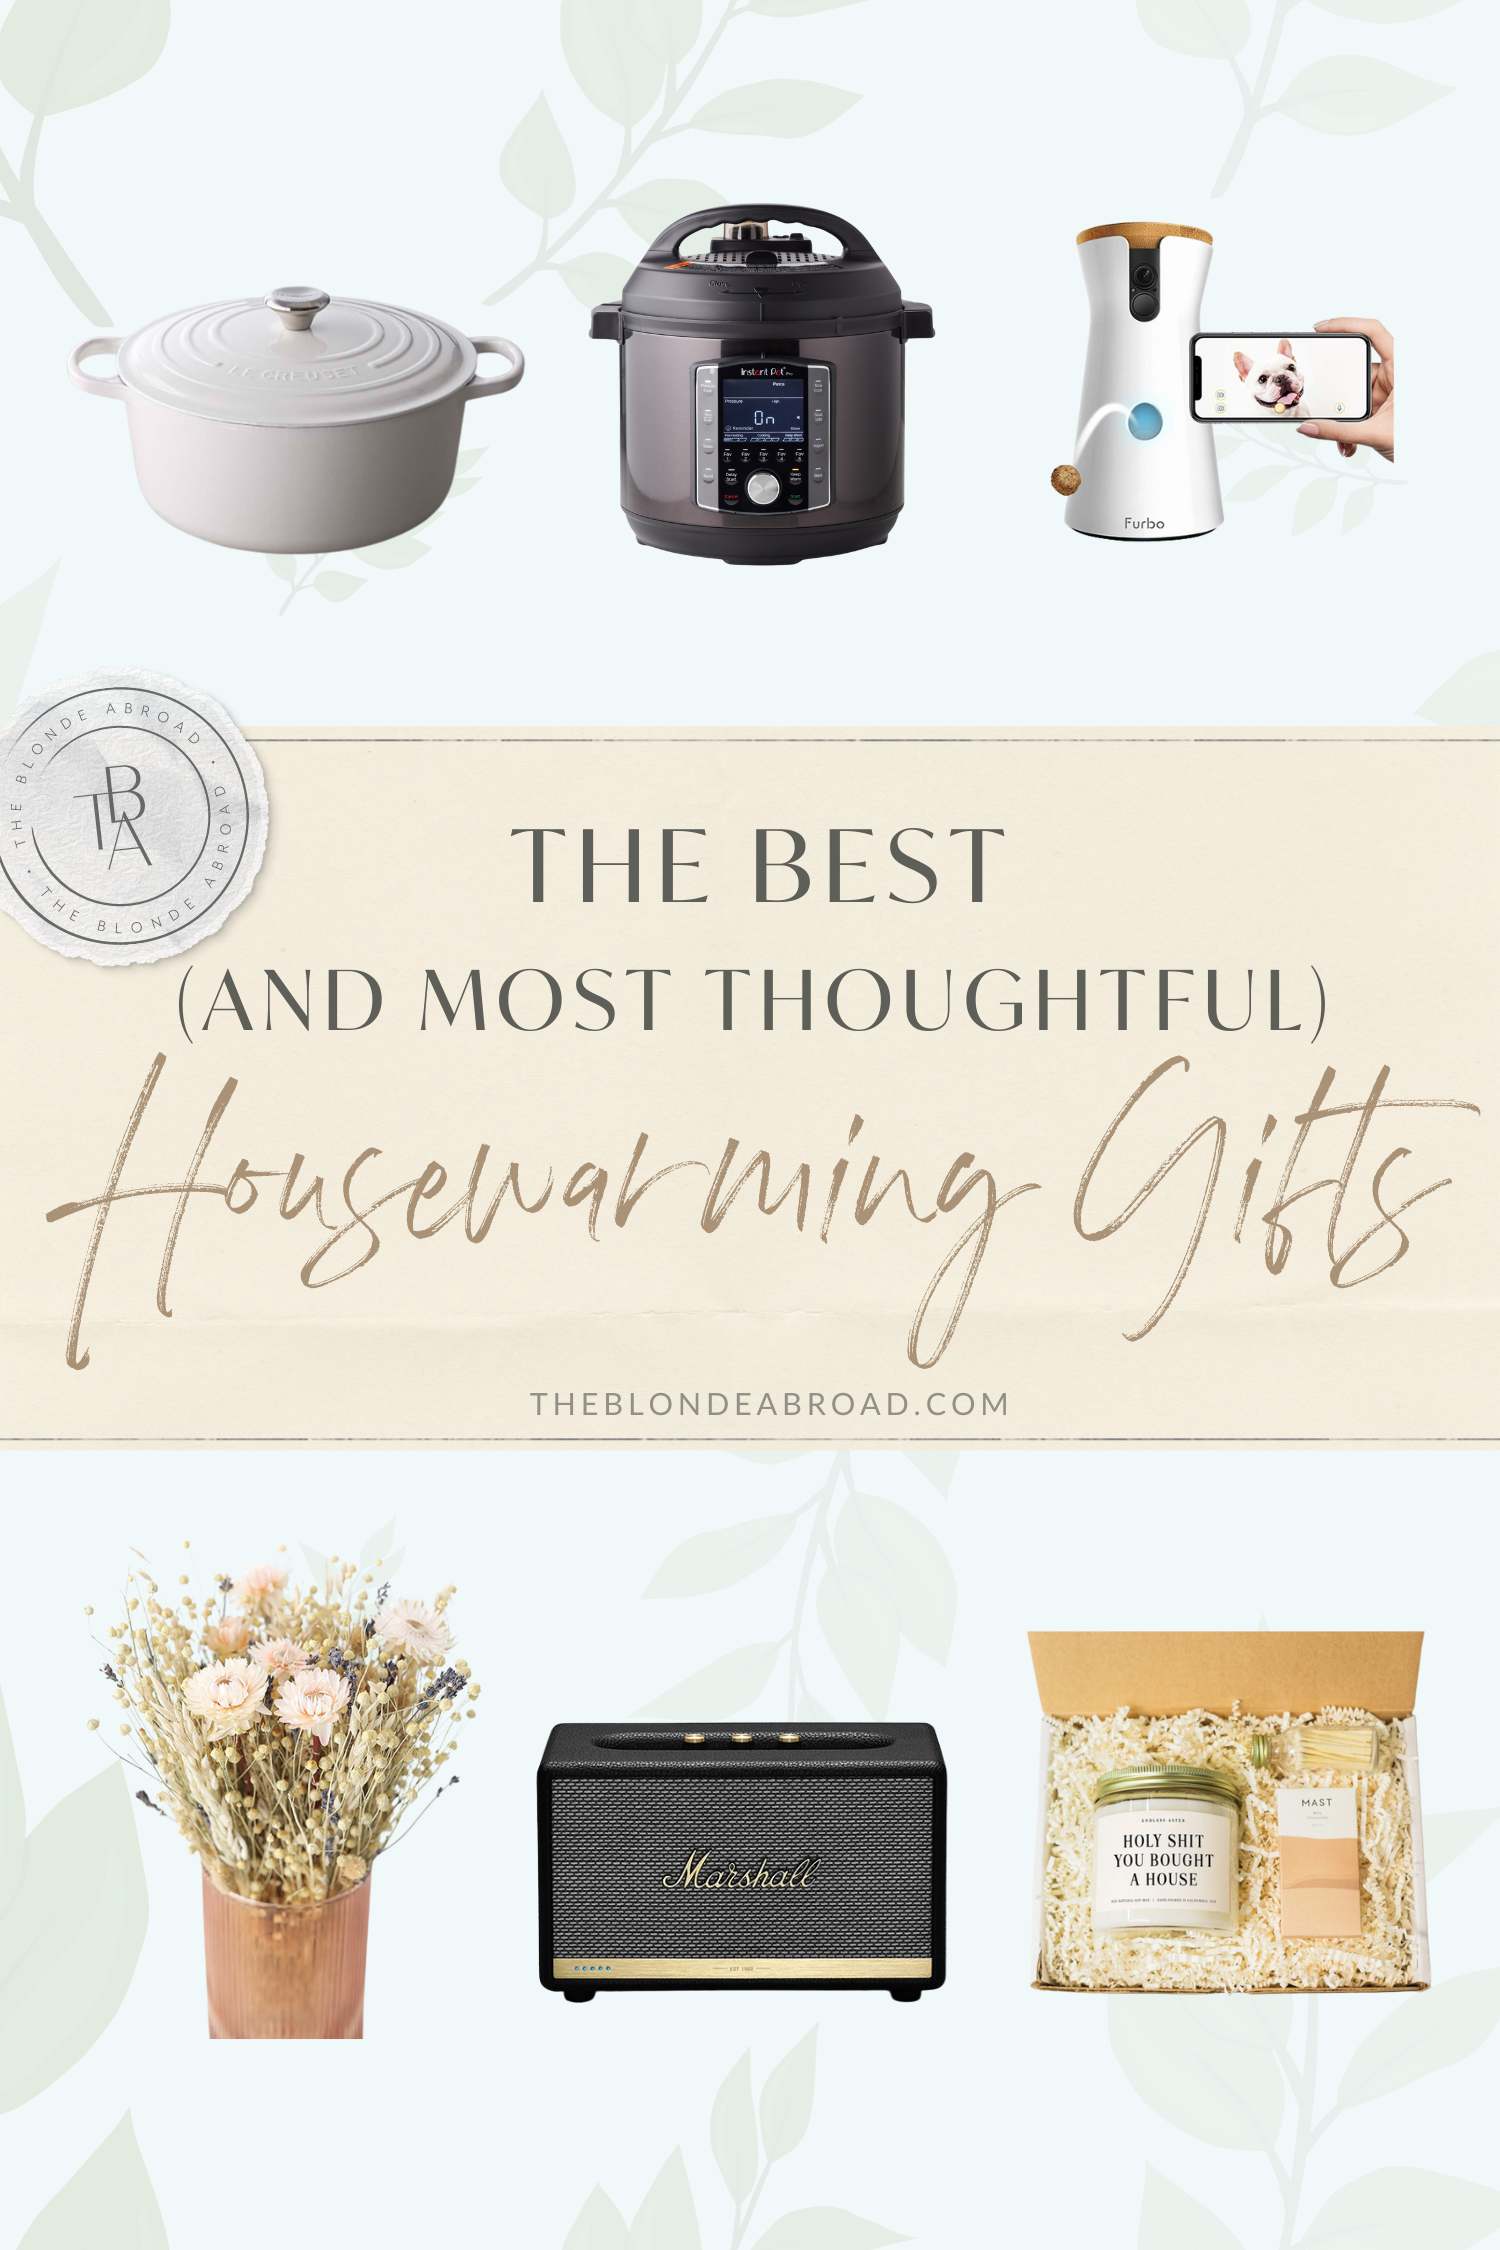 The best (and most thoughtful) housewarming gift ideas